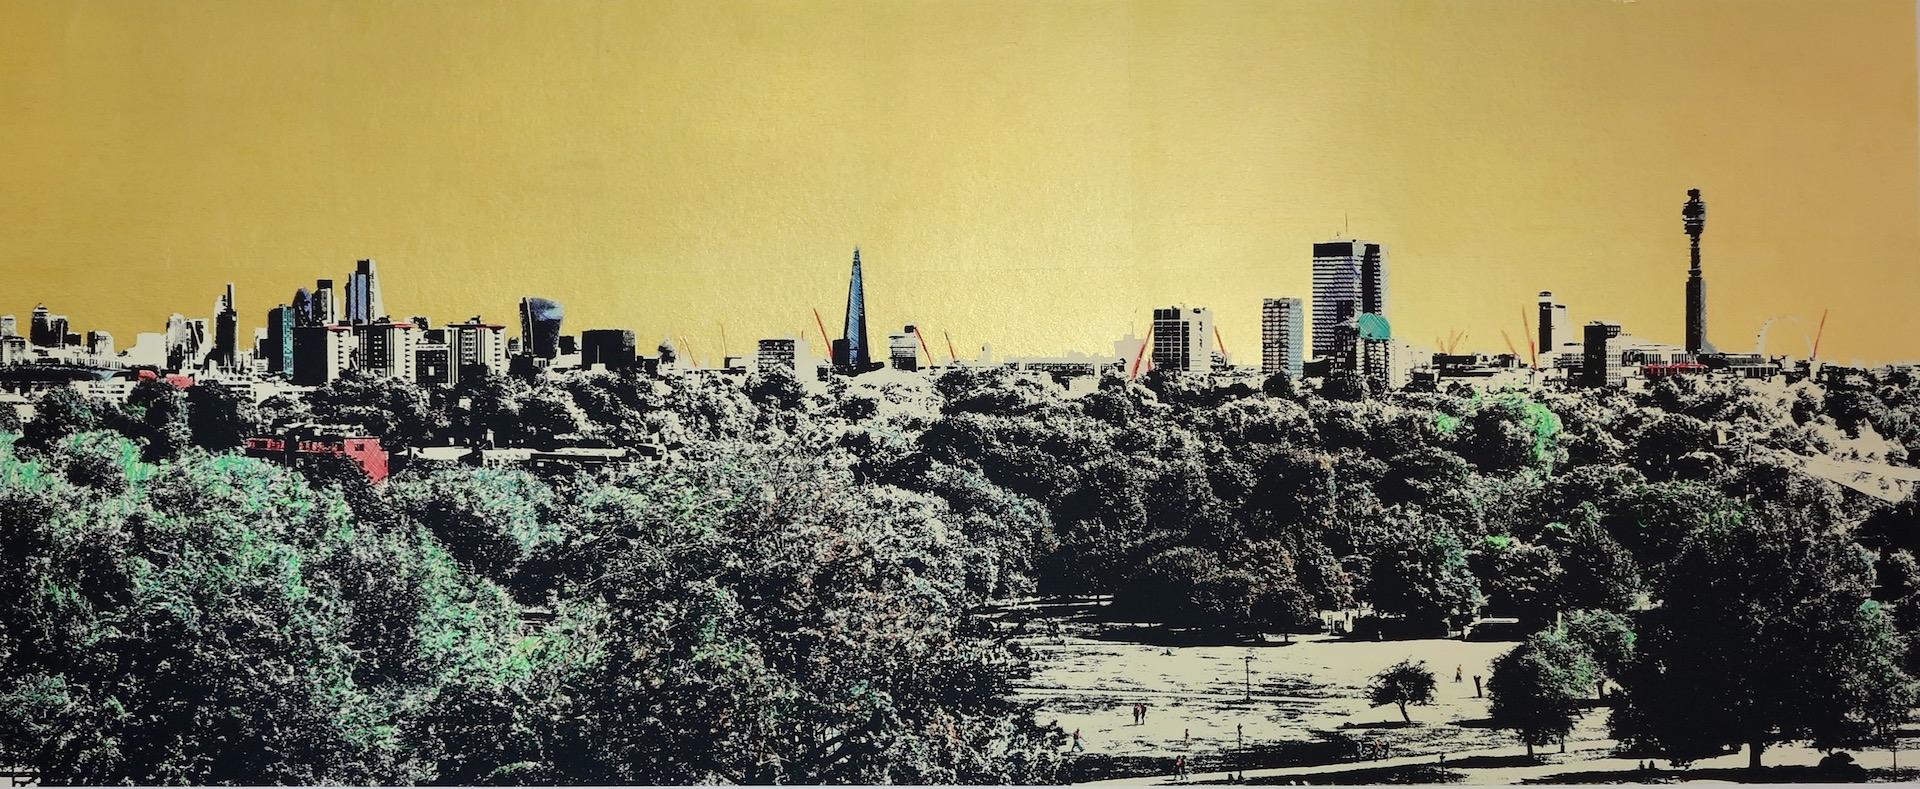 From Primrose Hill, Limited Edition Cityscape Print, Contemporary London Art